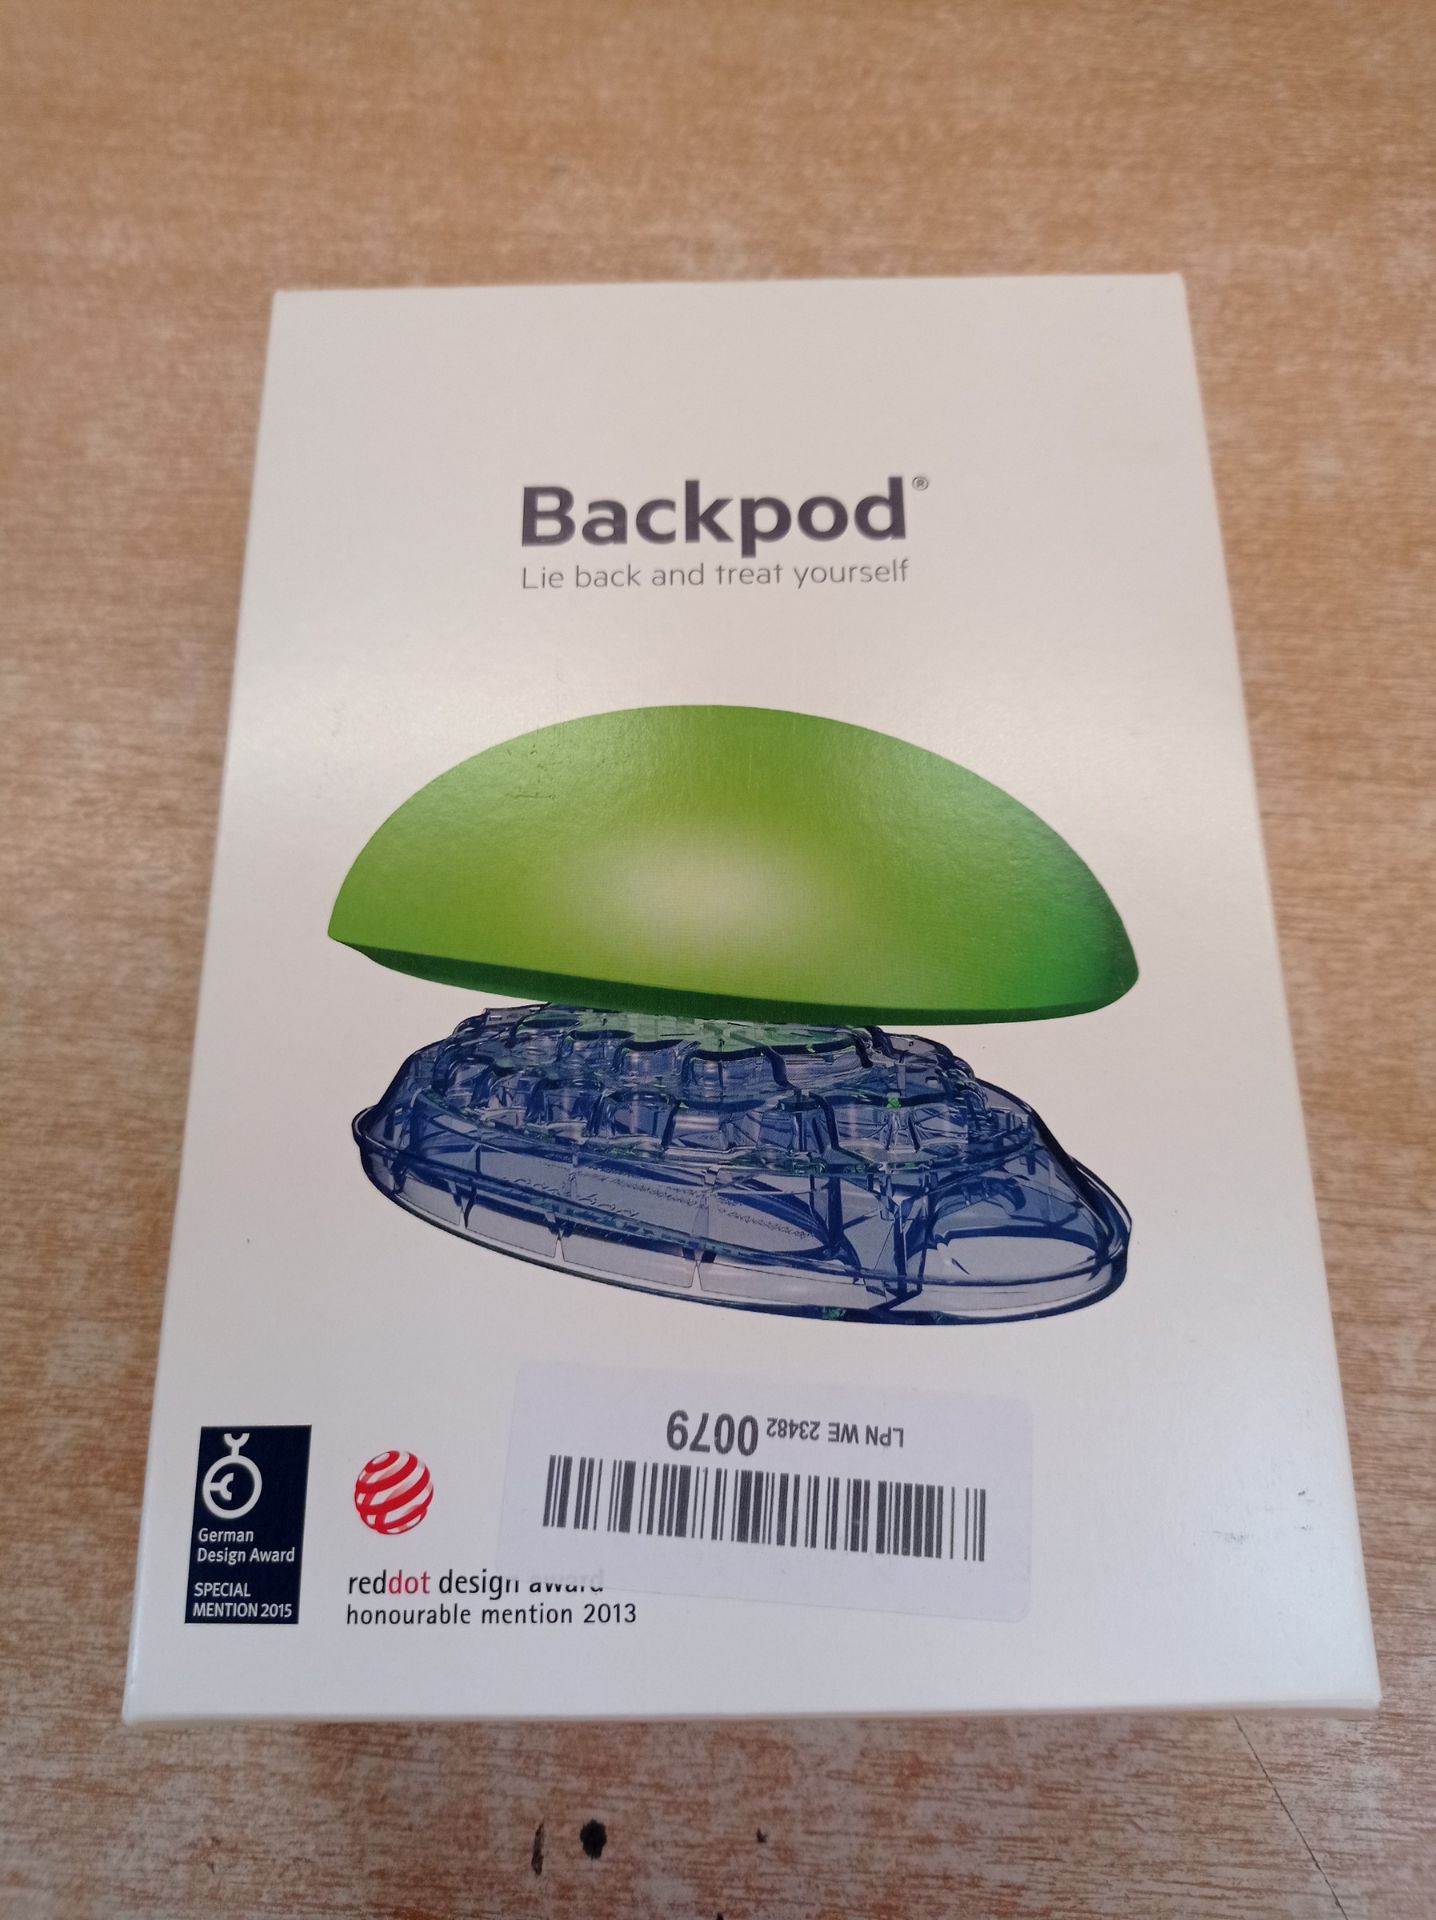 RRP £78.78 Bodystance The Backpod - Premium Treatment for Neck - Image 2 of 2